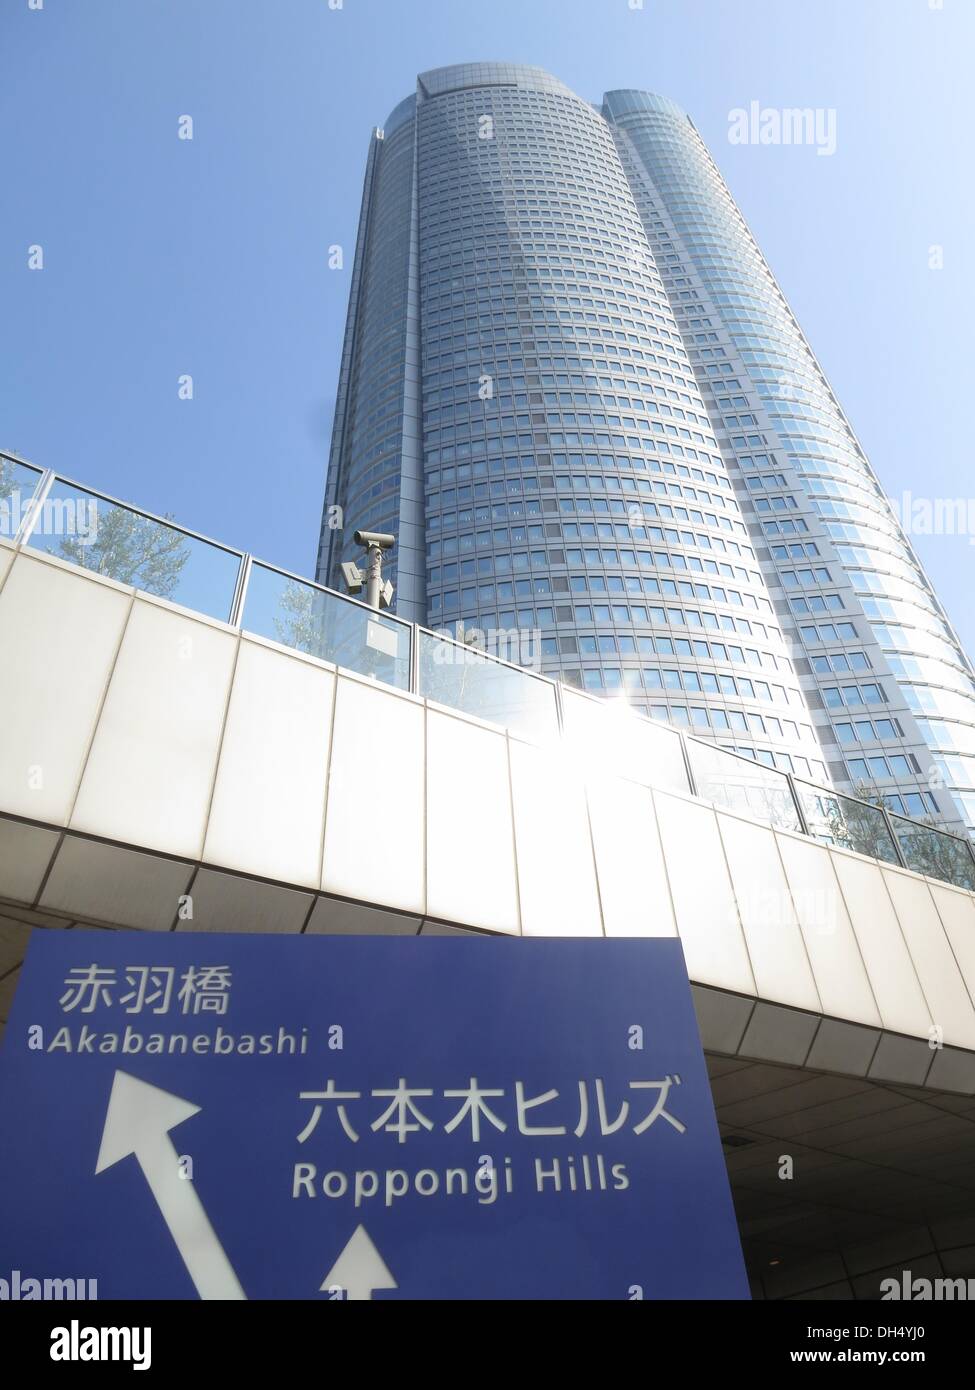 Tokio, Japan. 26th April, 2013. The 238 meters high skyscraper Mori tower with 54 levels dominates the Roppongi quarter in Tokio, Japan, 26 April 2013. The tower is part of an office and shopping block with 225 shops, as well as restaurants and cafes, the Mori Art Museum and the studio of TV channel Asahi TV. Photo: Peter Jaehnel/dpa/Alamy Live News Stock Photo